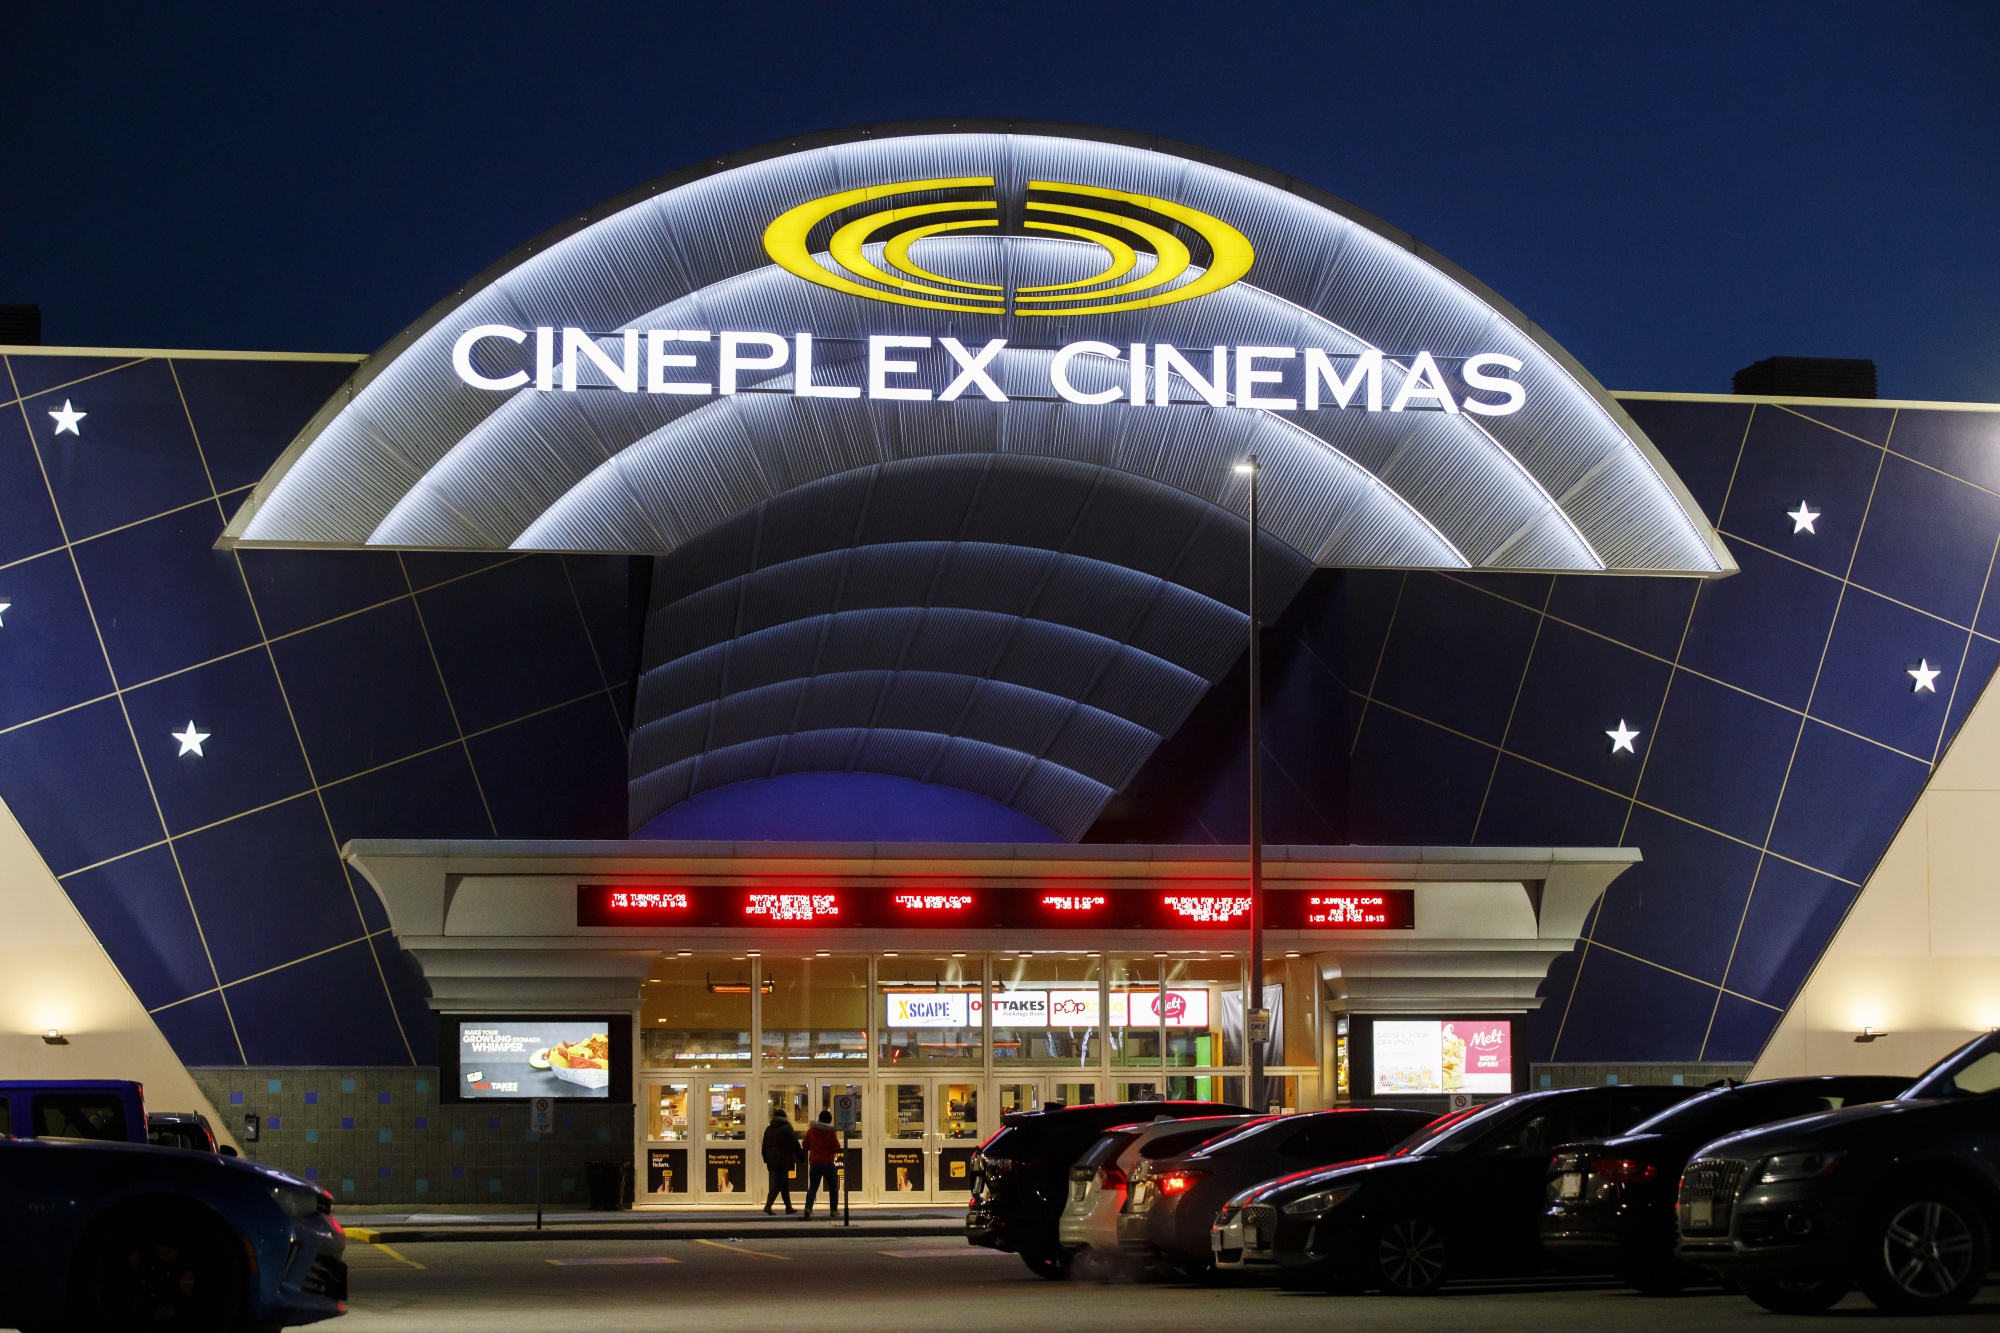 CAA Canada: Get 4 Cineplex Tickets for $34 *HOT* - Canadian Freebies,  Coupons, Deals, Bargains, Flyers, Contests Canada Canadian Freebies,  Coupons, Deals, Bargains, Flyers, Contests Canada